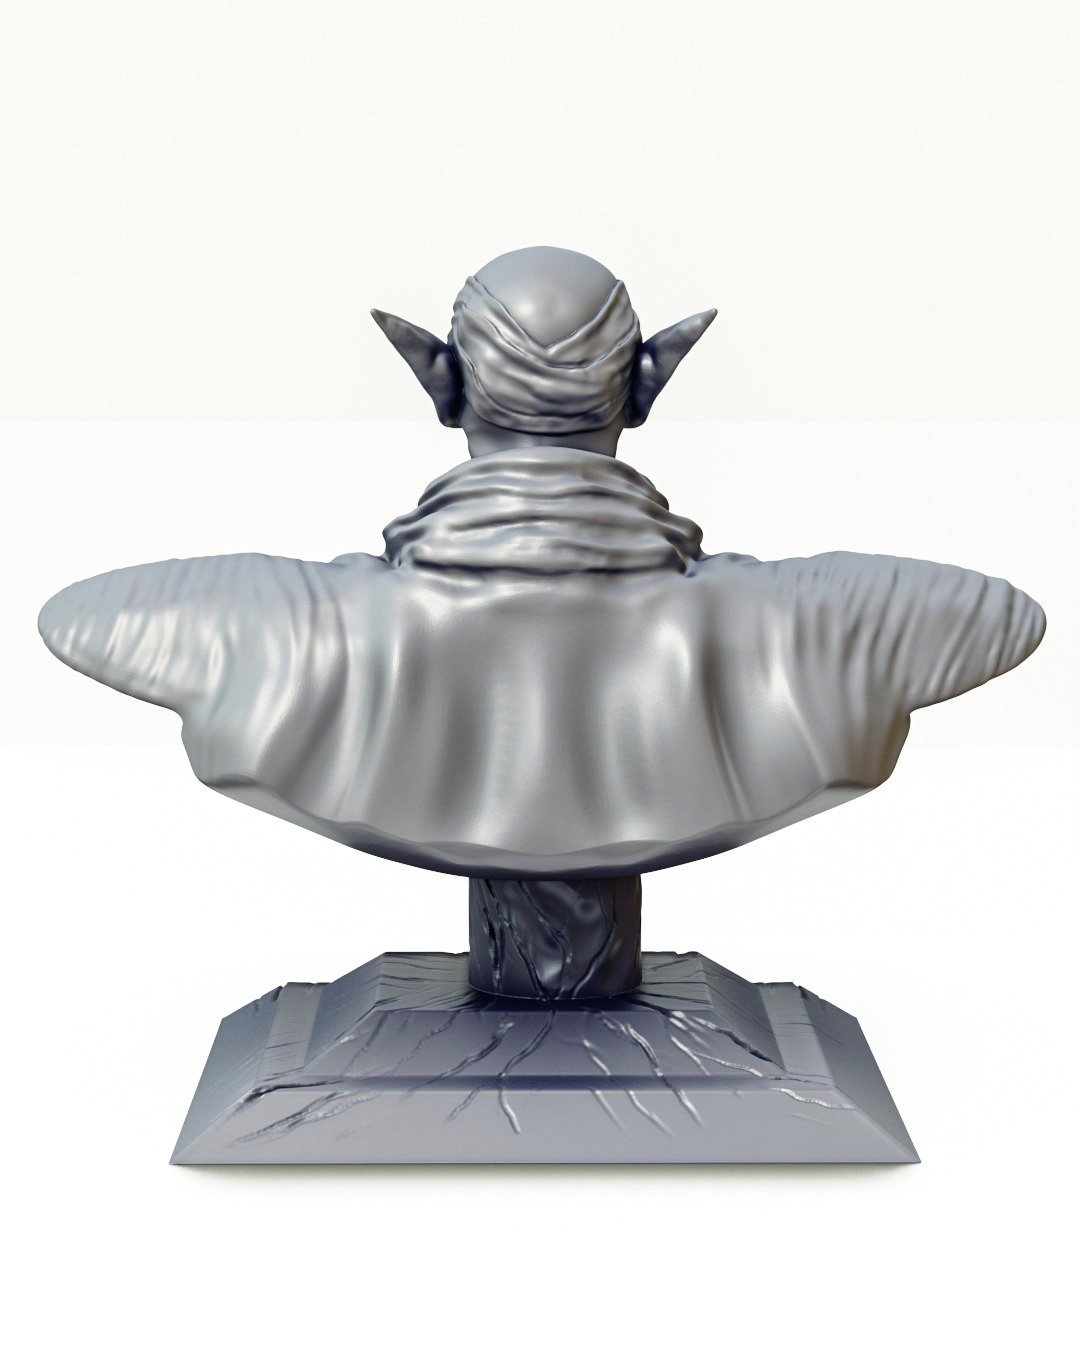 sculpture 3D Render 3d modeling 3dprinting 3dprint Character Piccolo Dragonball toy